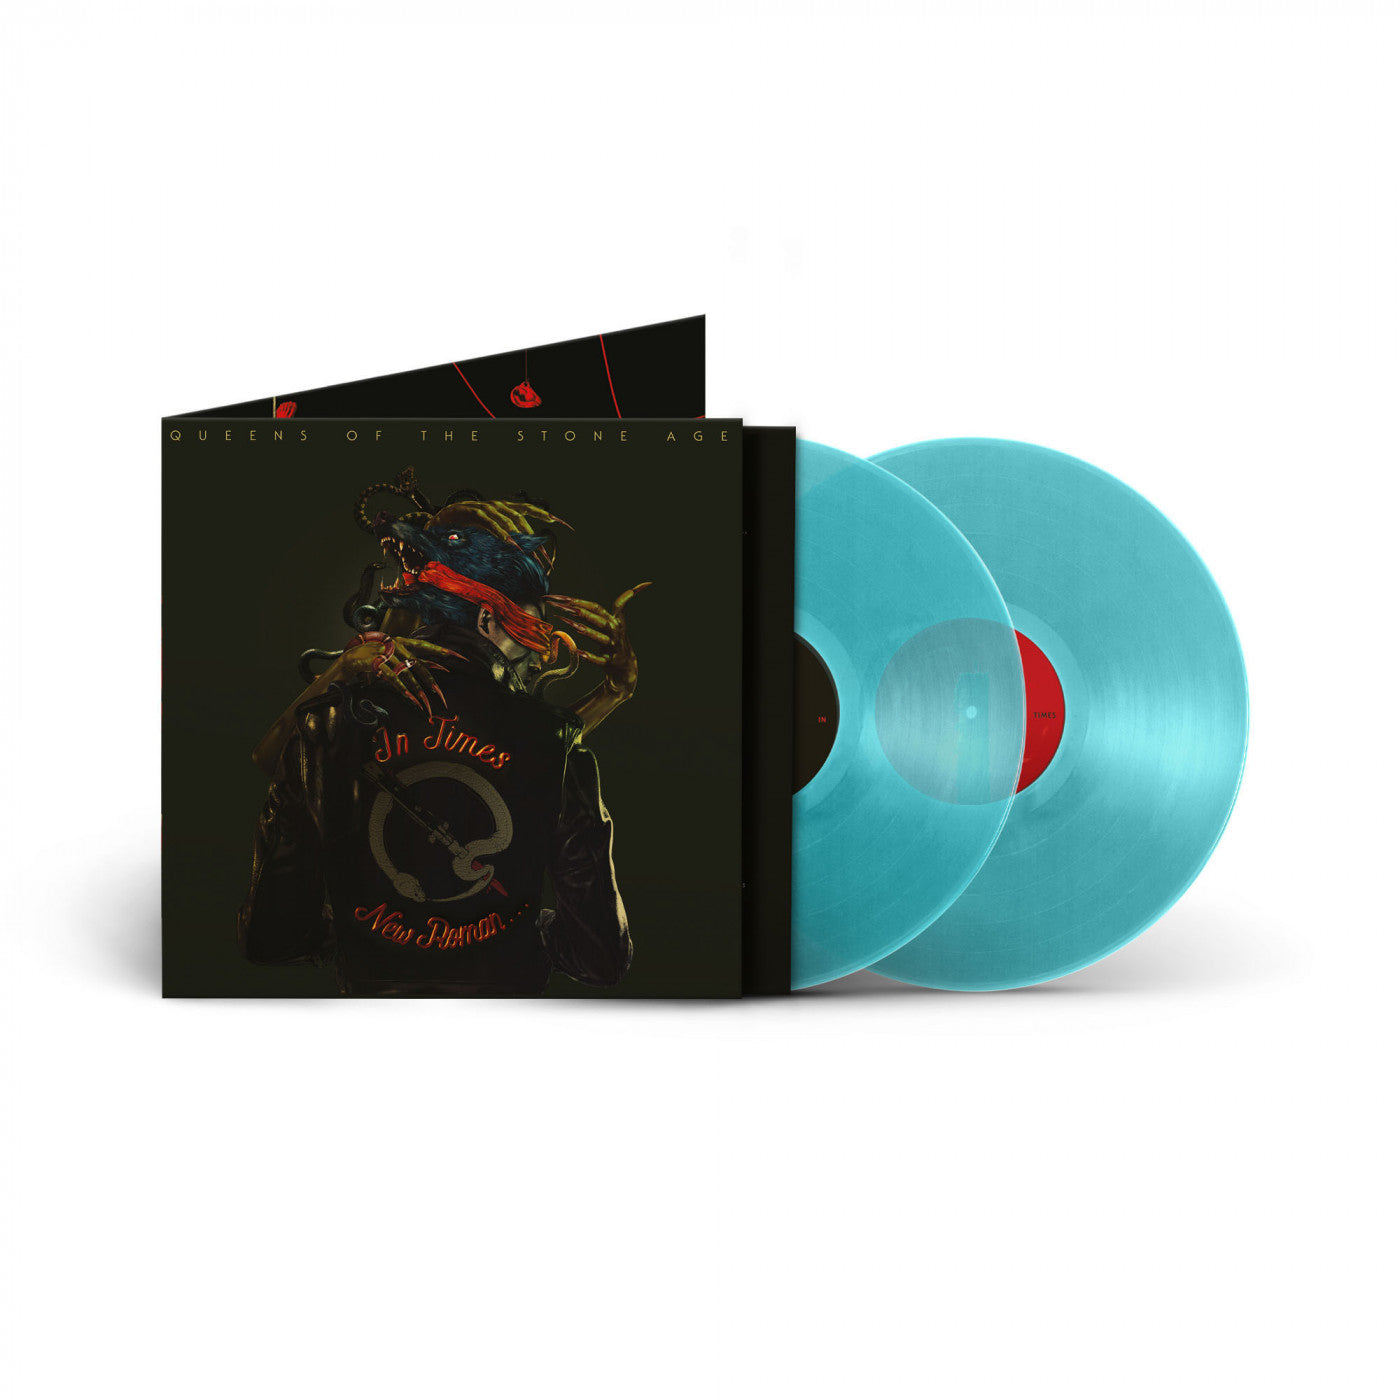 Queens of the Stone Age – In Times New Roman... – Blaue LP